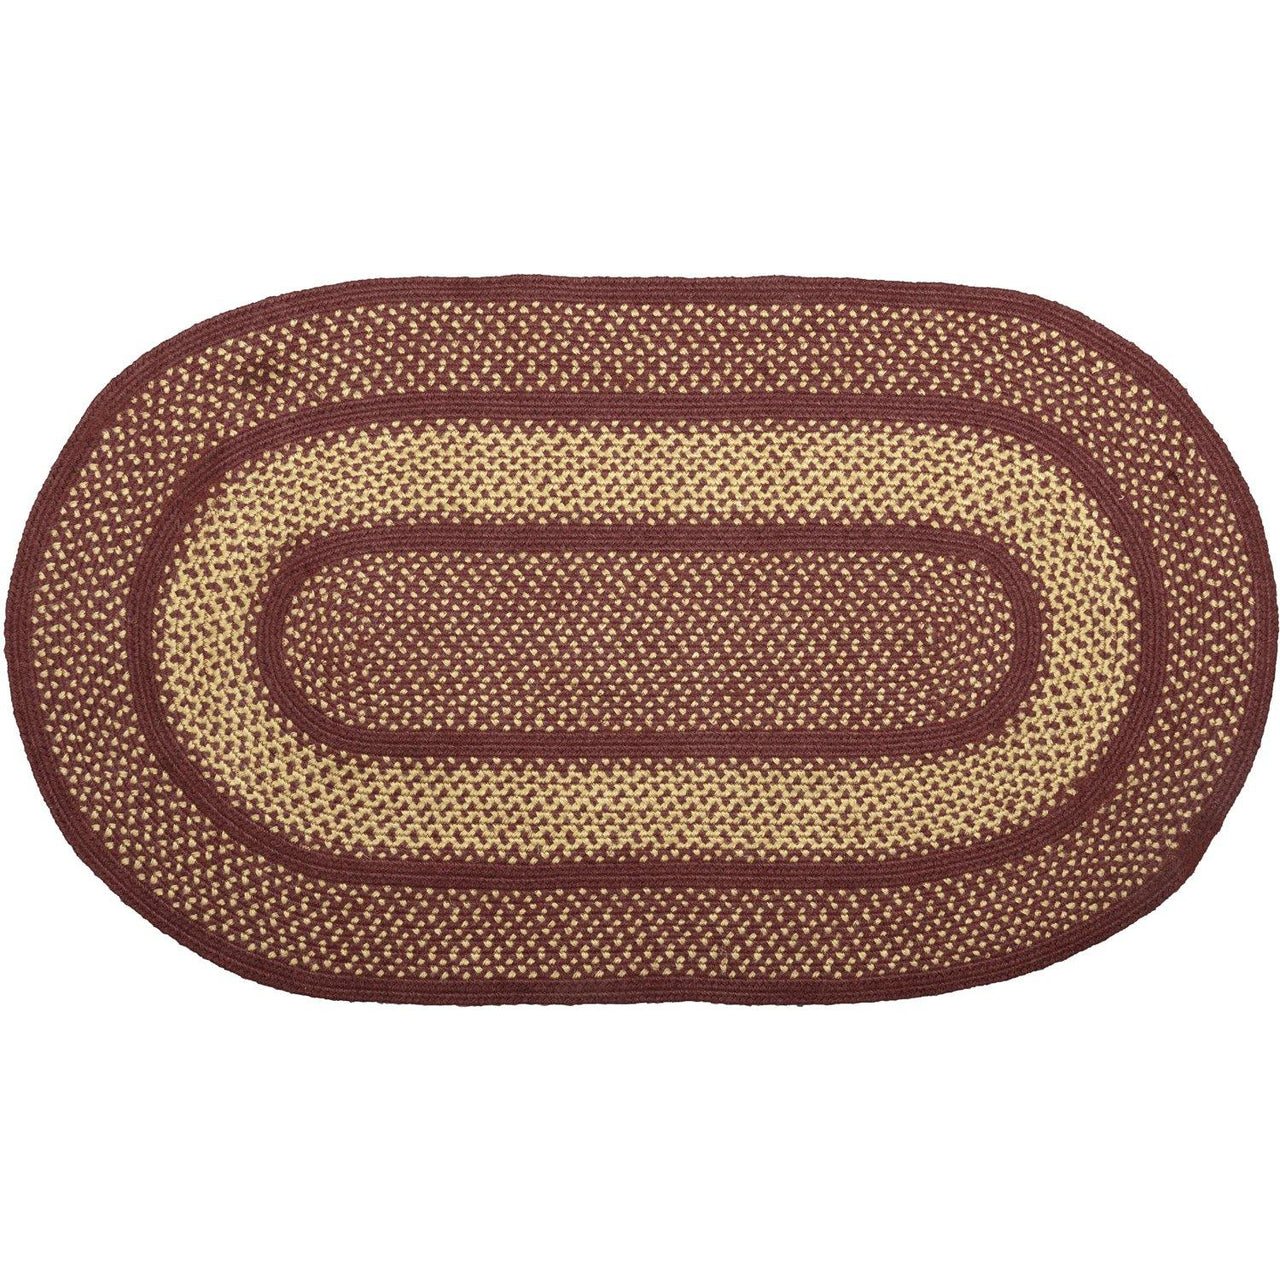 Burgundy Red Primitive Jute Braided Rug Oval 27"x48" with Rug Pad VHC Brands - The Fox Decor